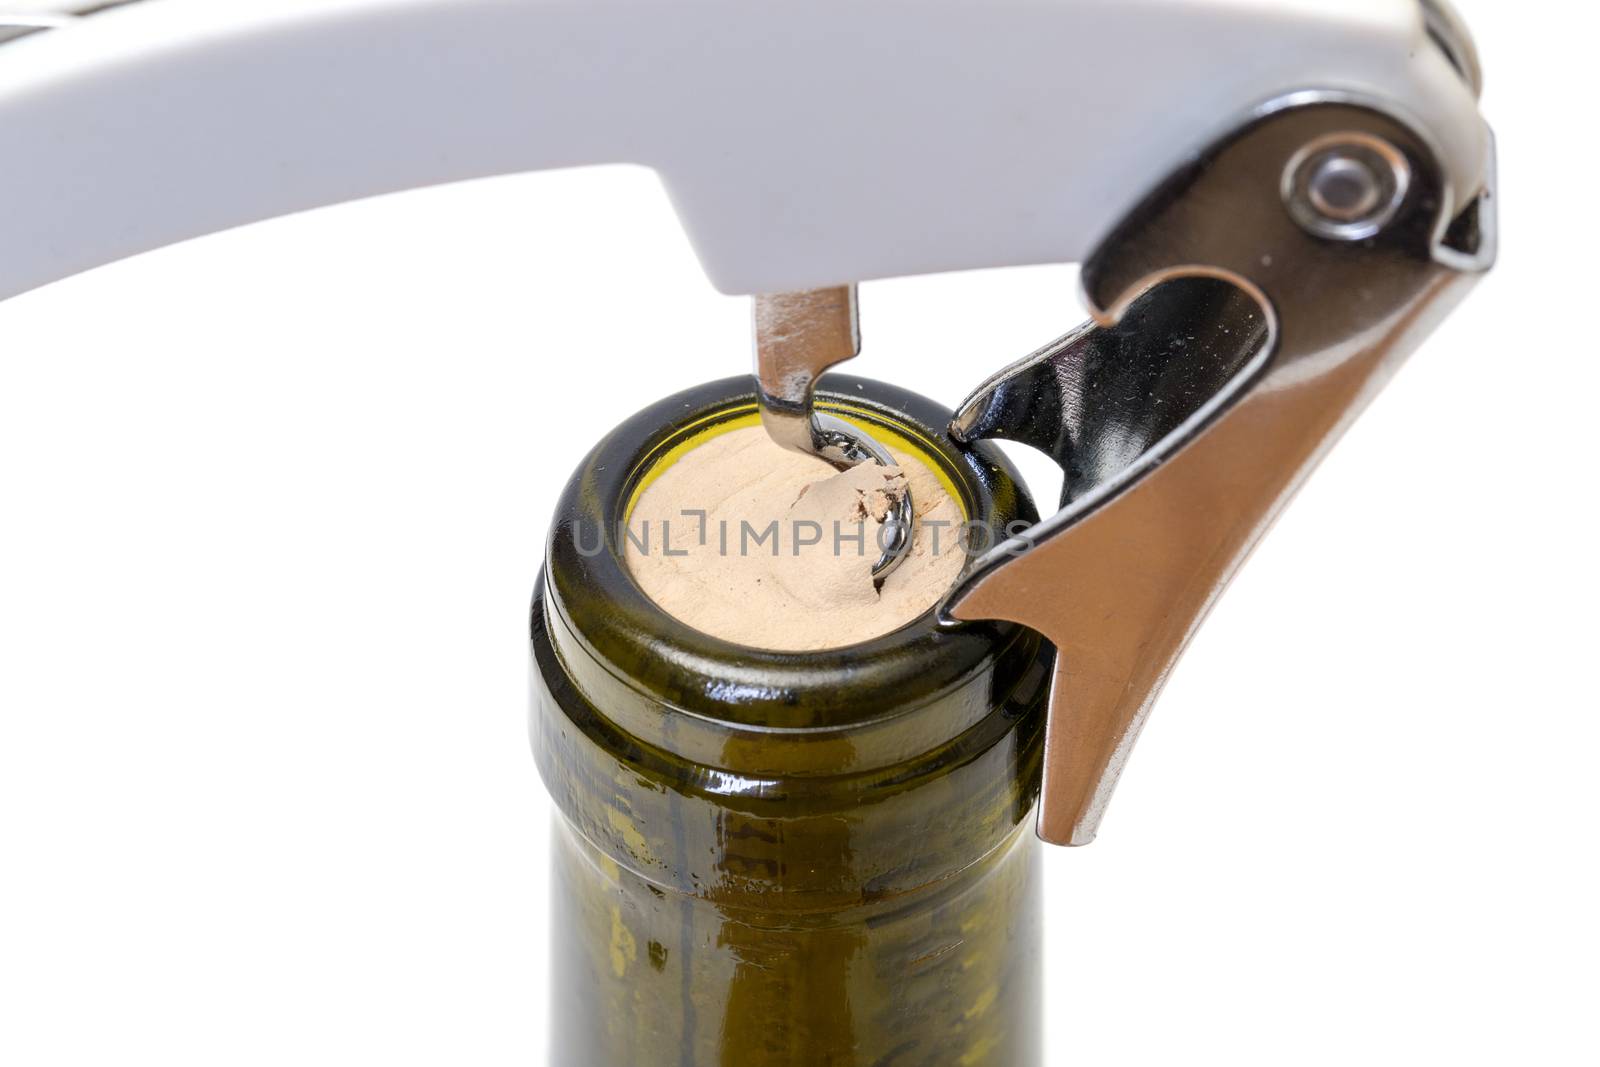 Corkscrew with Bottle of Wine by Discovod